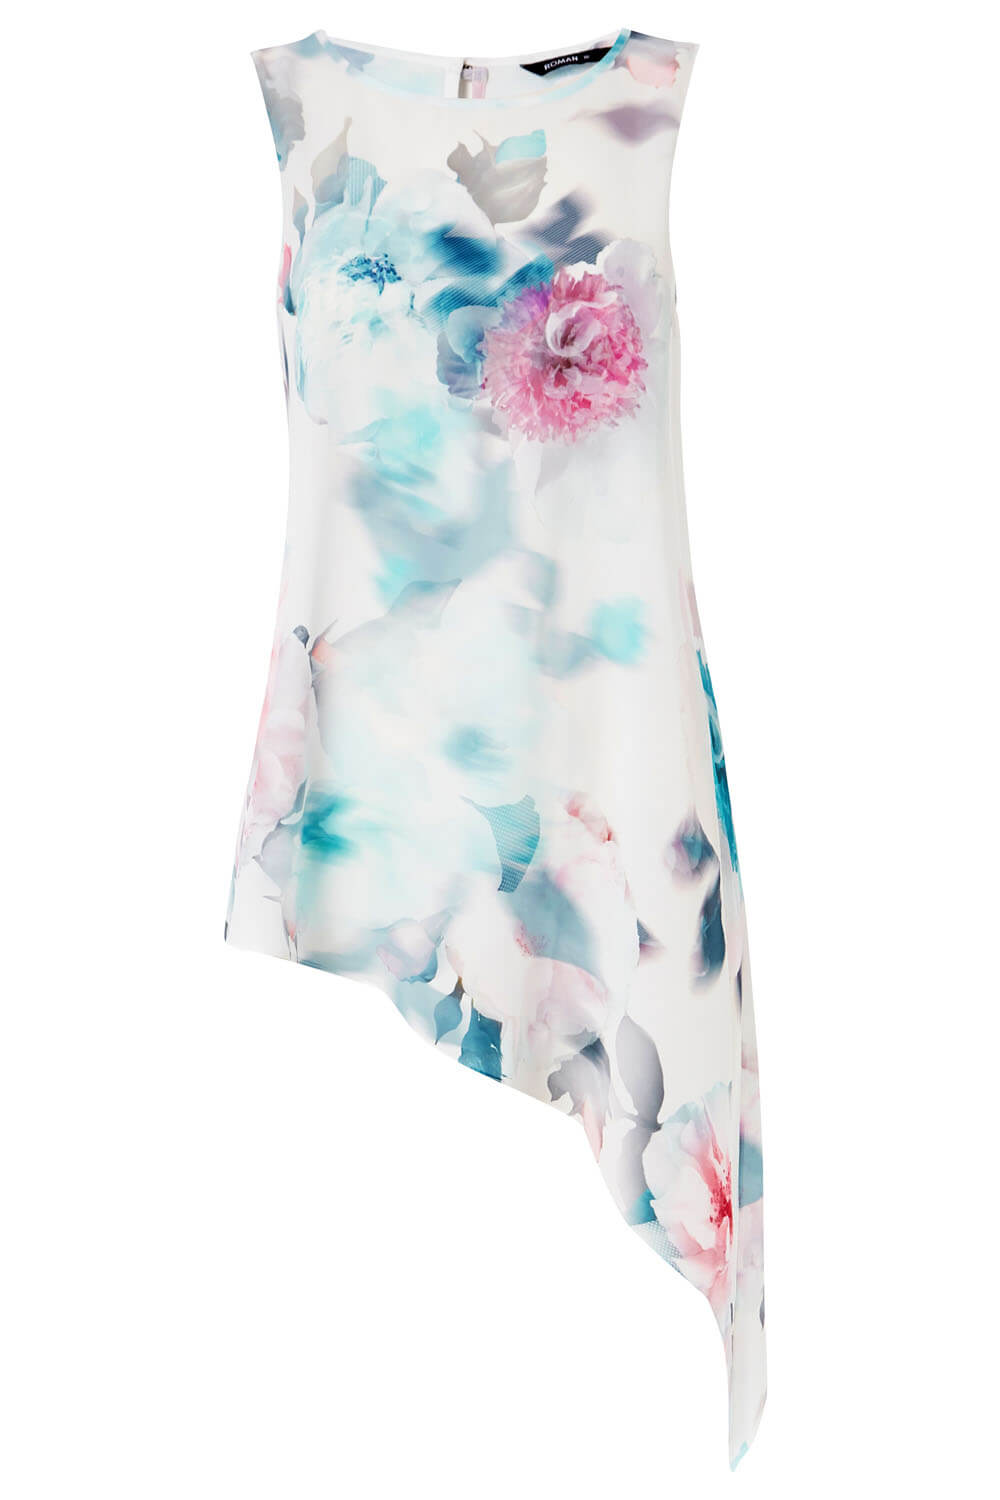 Ivory  Floral Print Asymmetric Tunic Top, Image 4 of 4